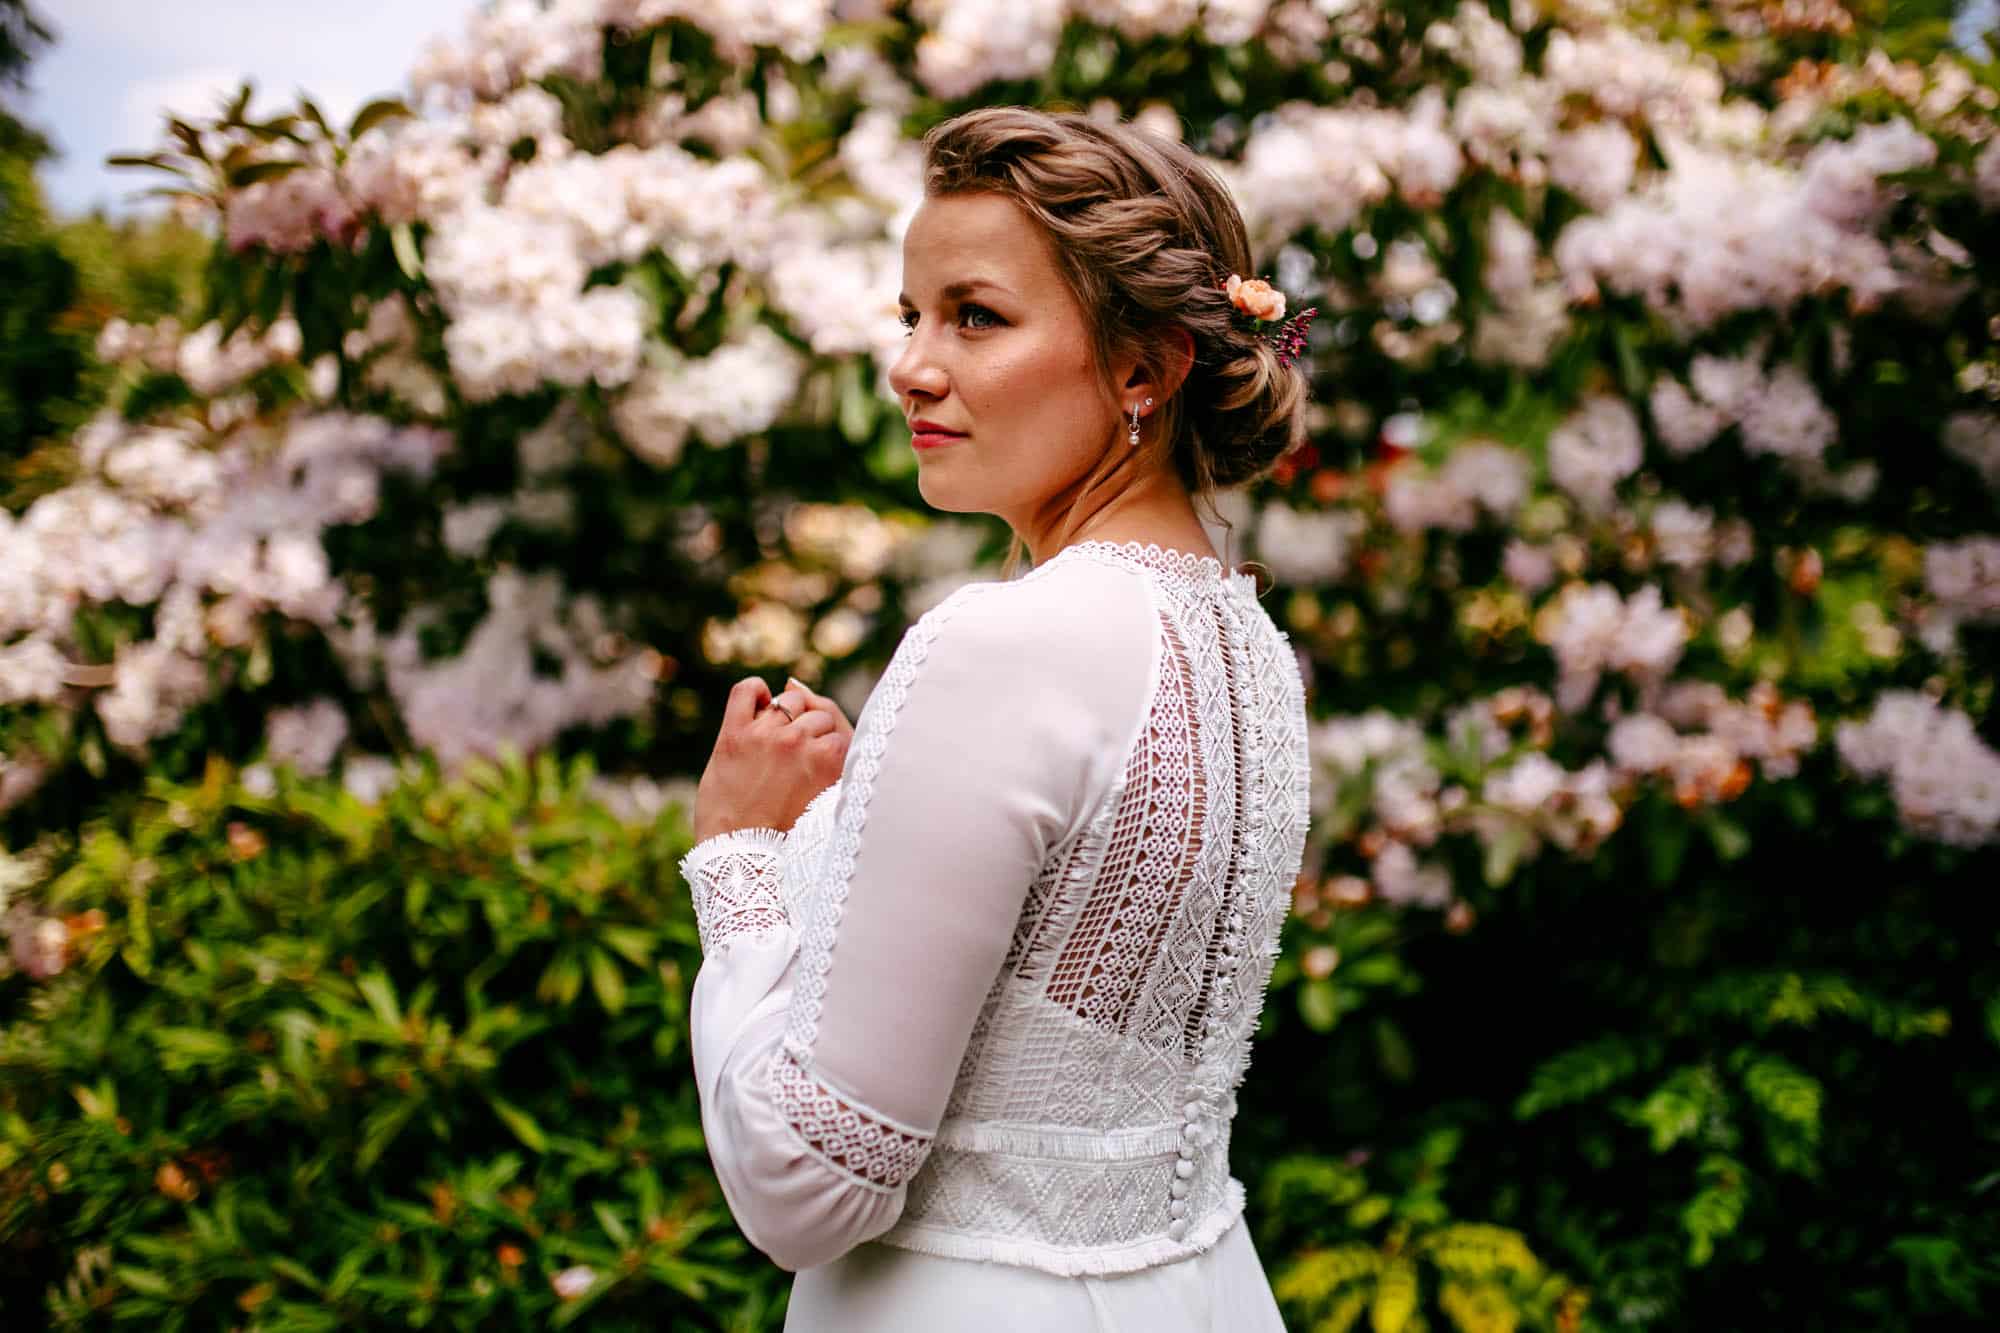 A Bohemian bride in a white dress standing in front of flowers.